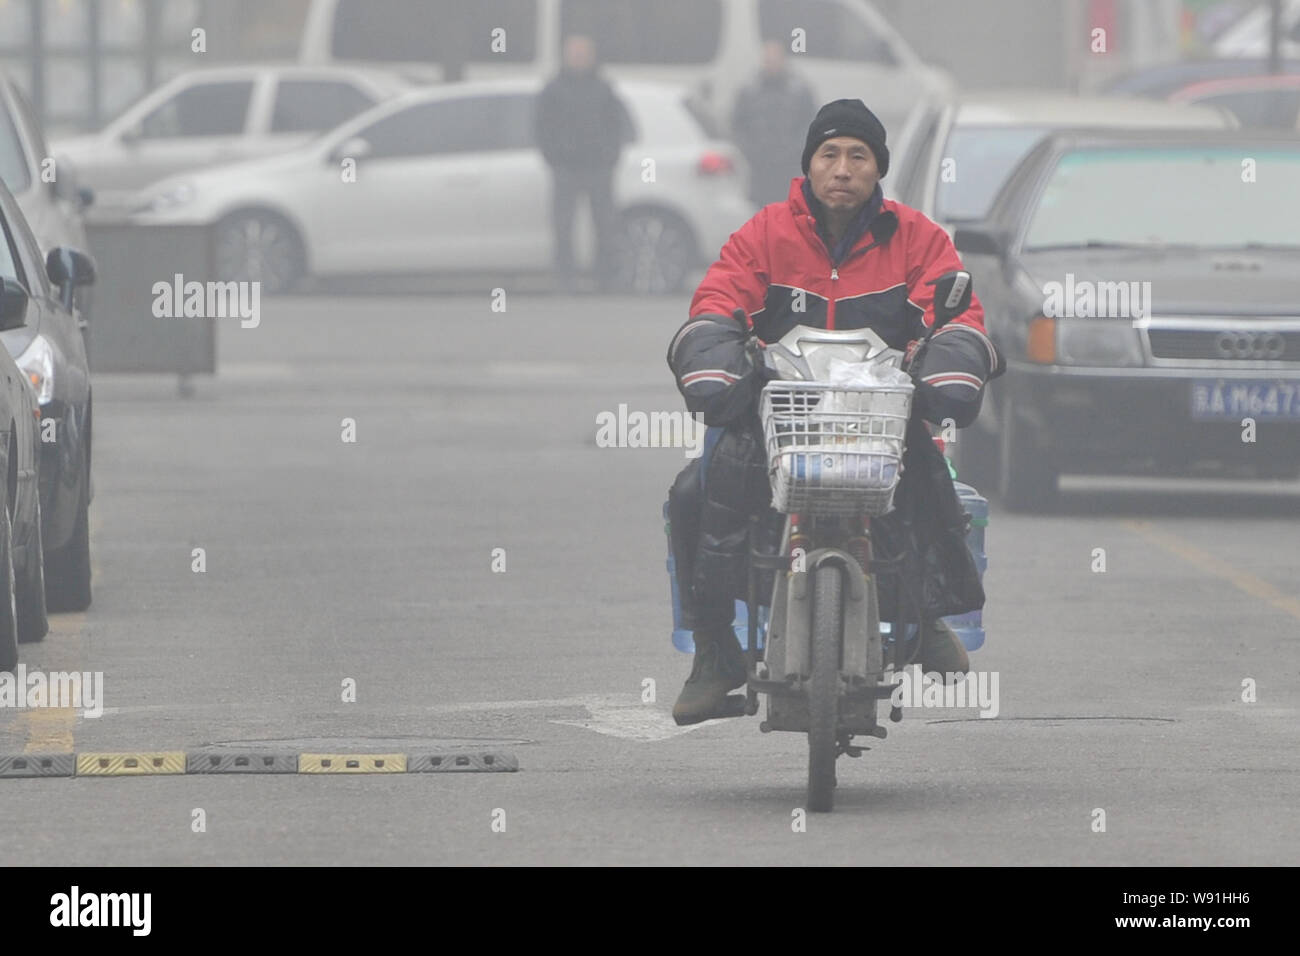 --FILE--A purified water deliveryman rides on a road in heavy smog in Beijing, China, 29 January 2013.   A new study links heavy air pollution from co Stock Photo